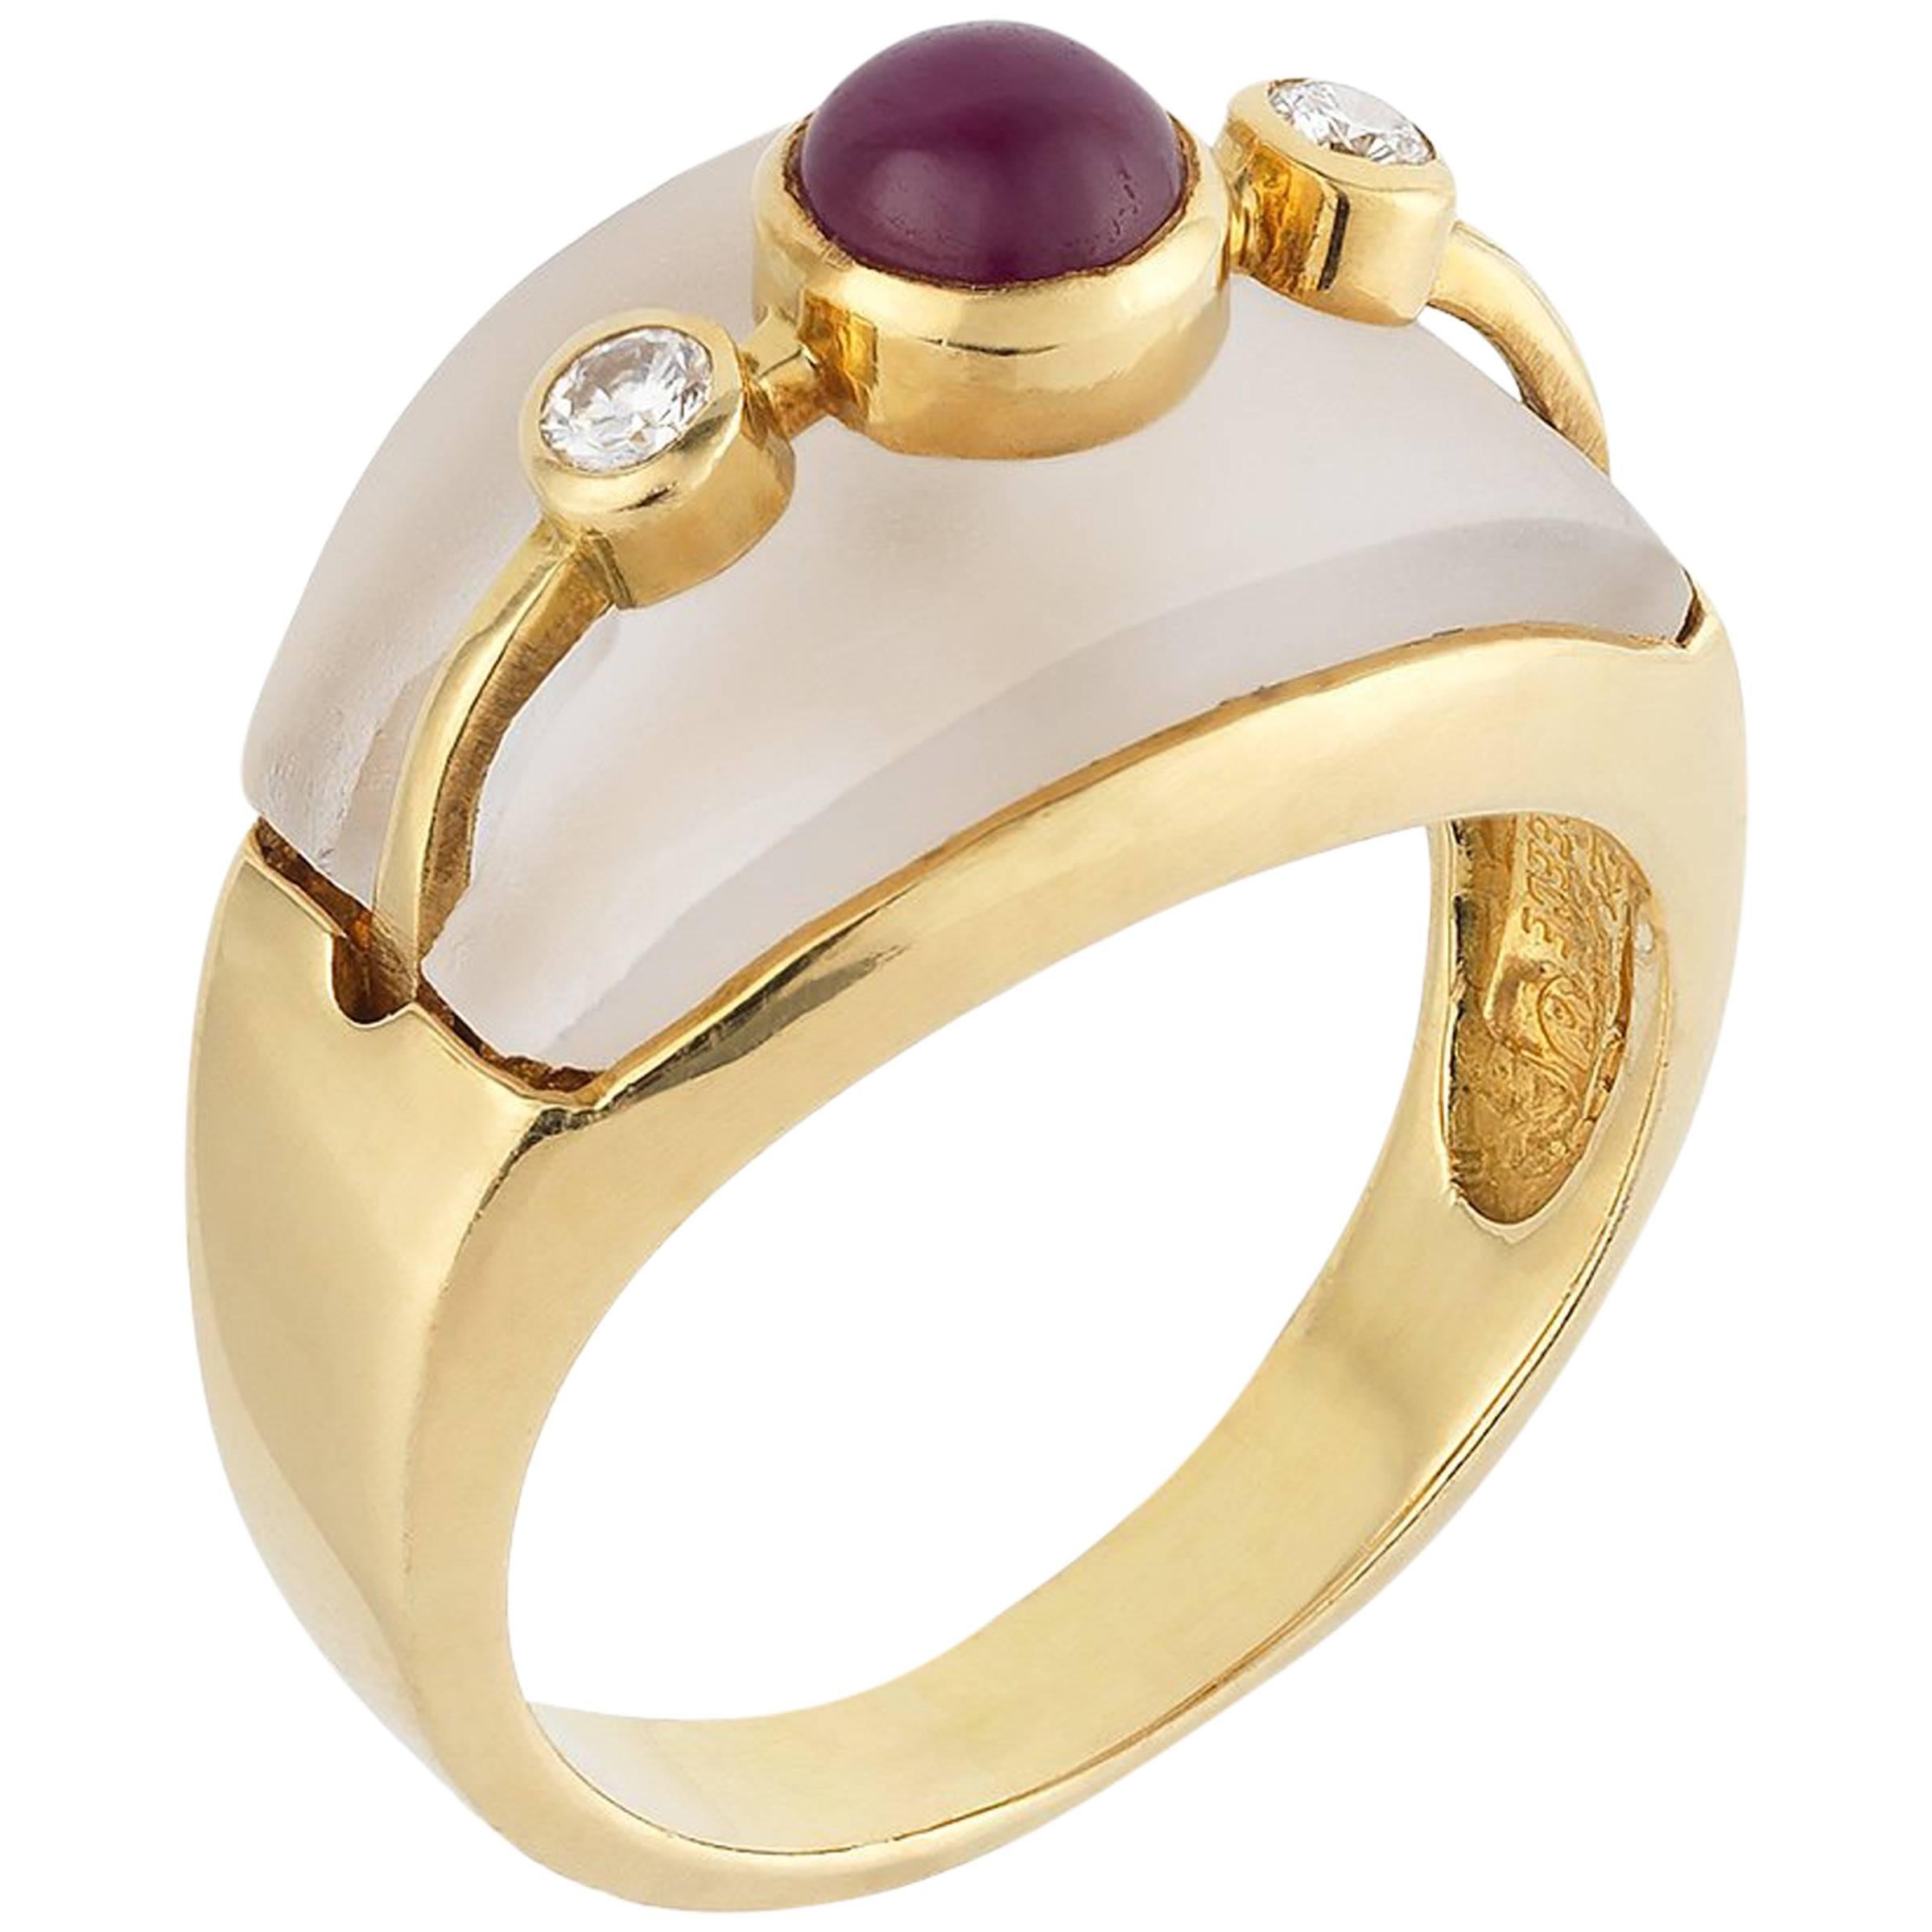 Lalaounis Frosted Ruby Cabochon Ring